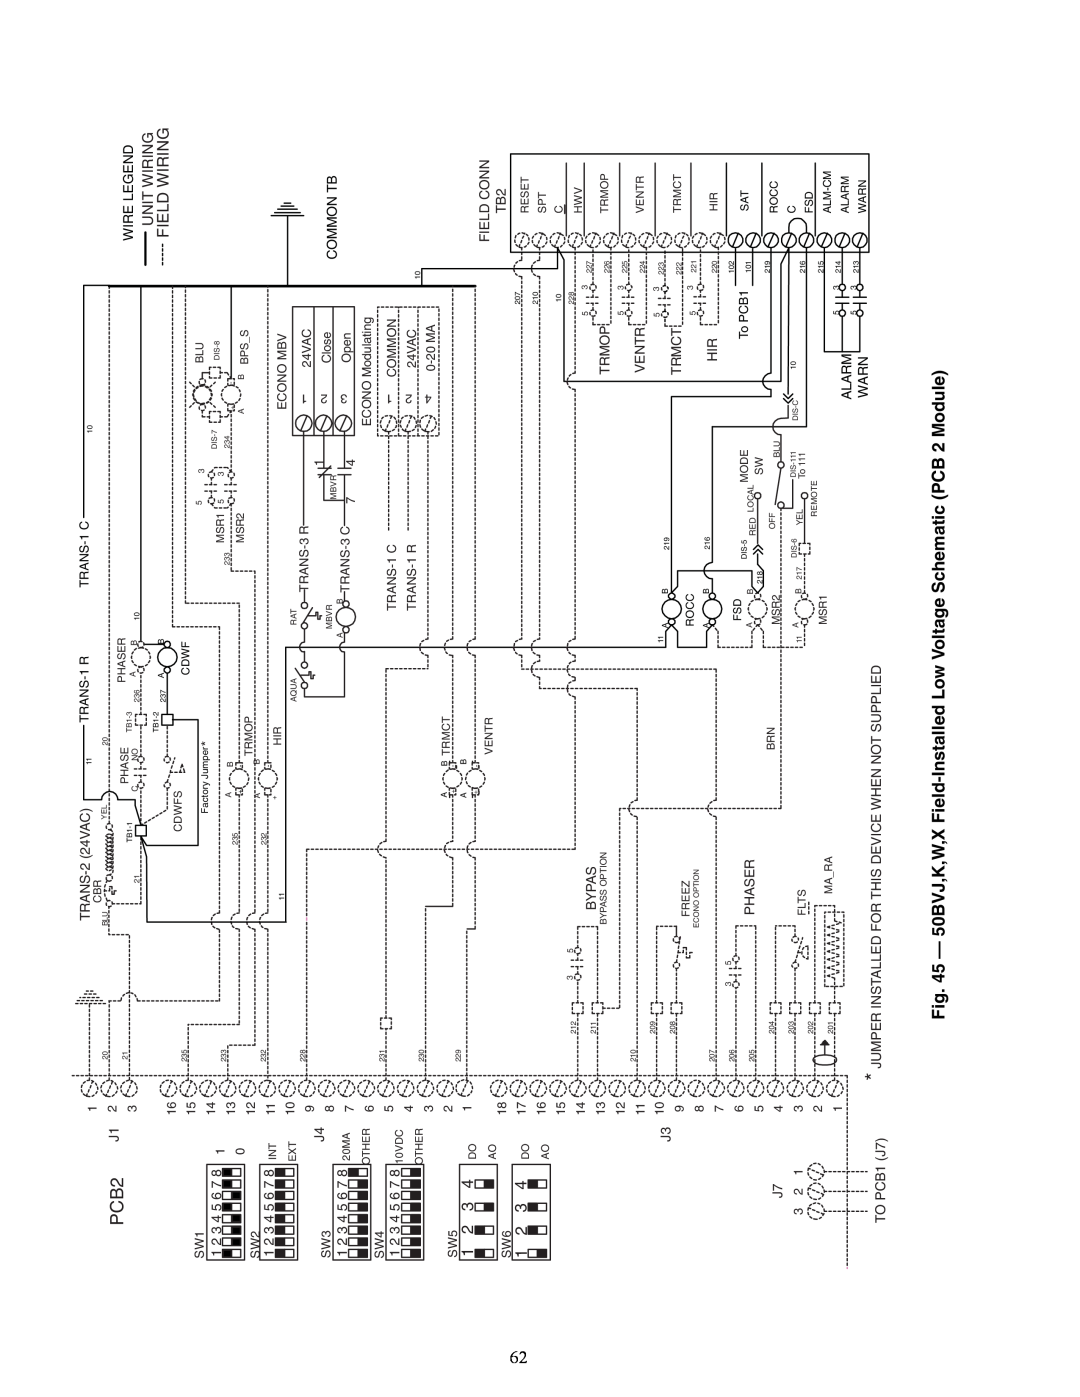 Carrier 50BV020-064 specifications PCB2 J1, Field Wiring 